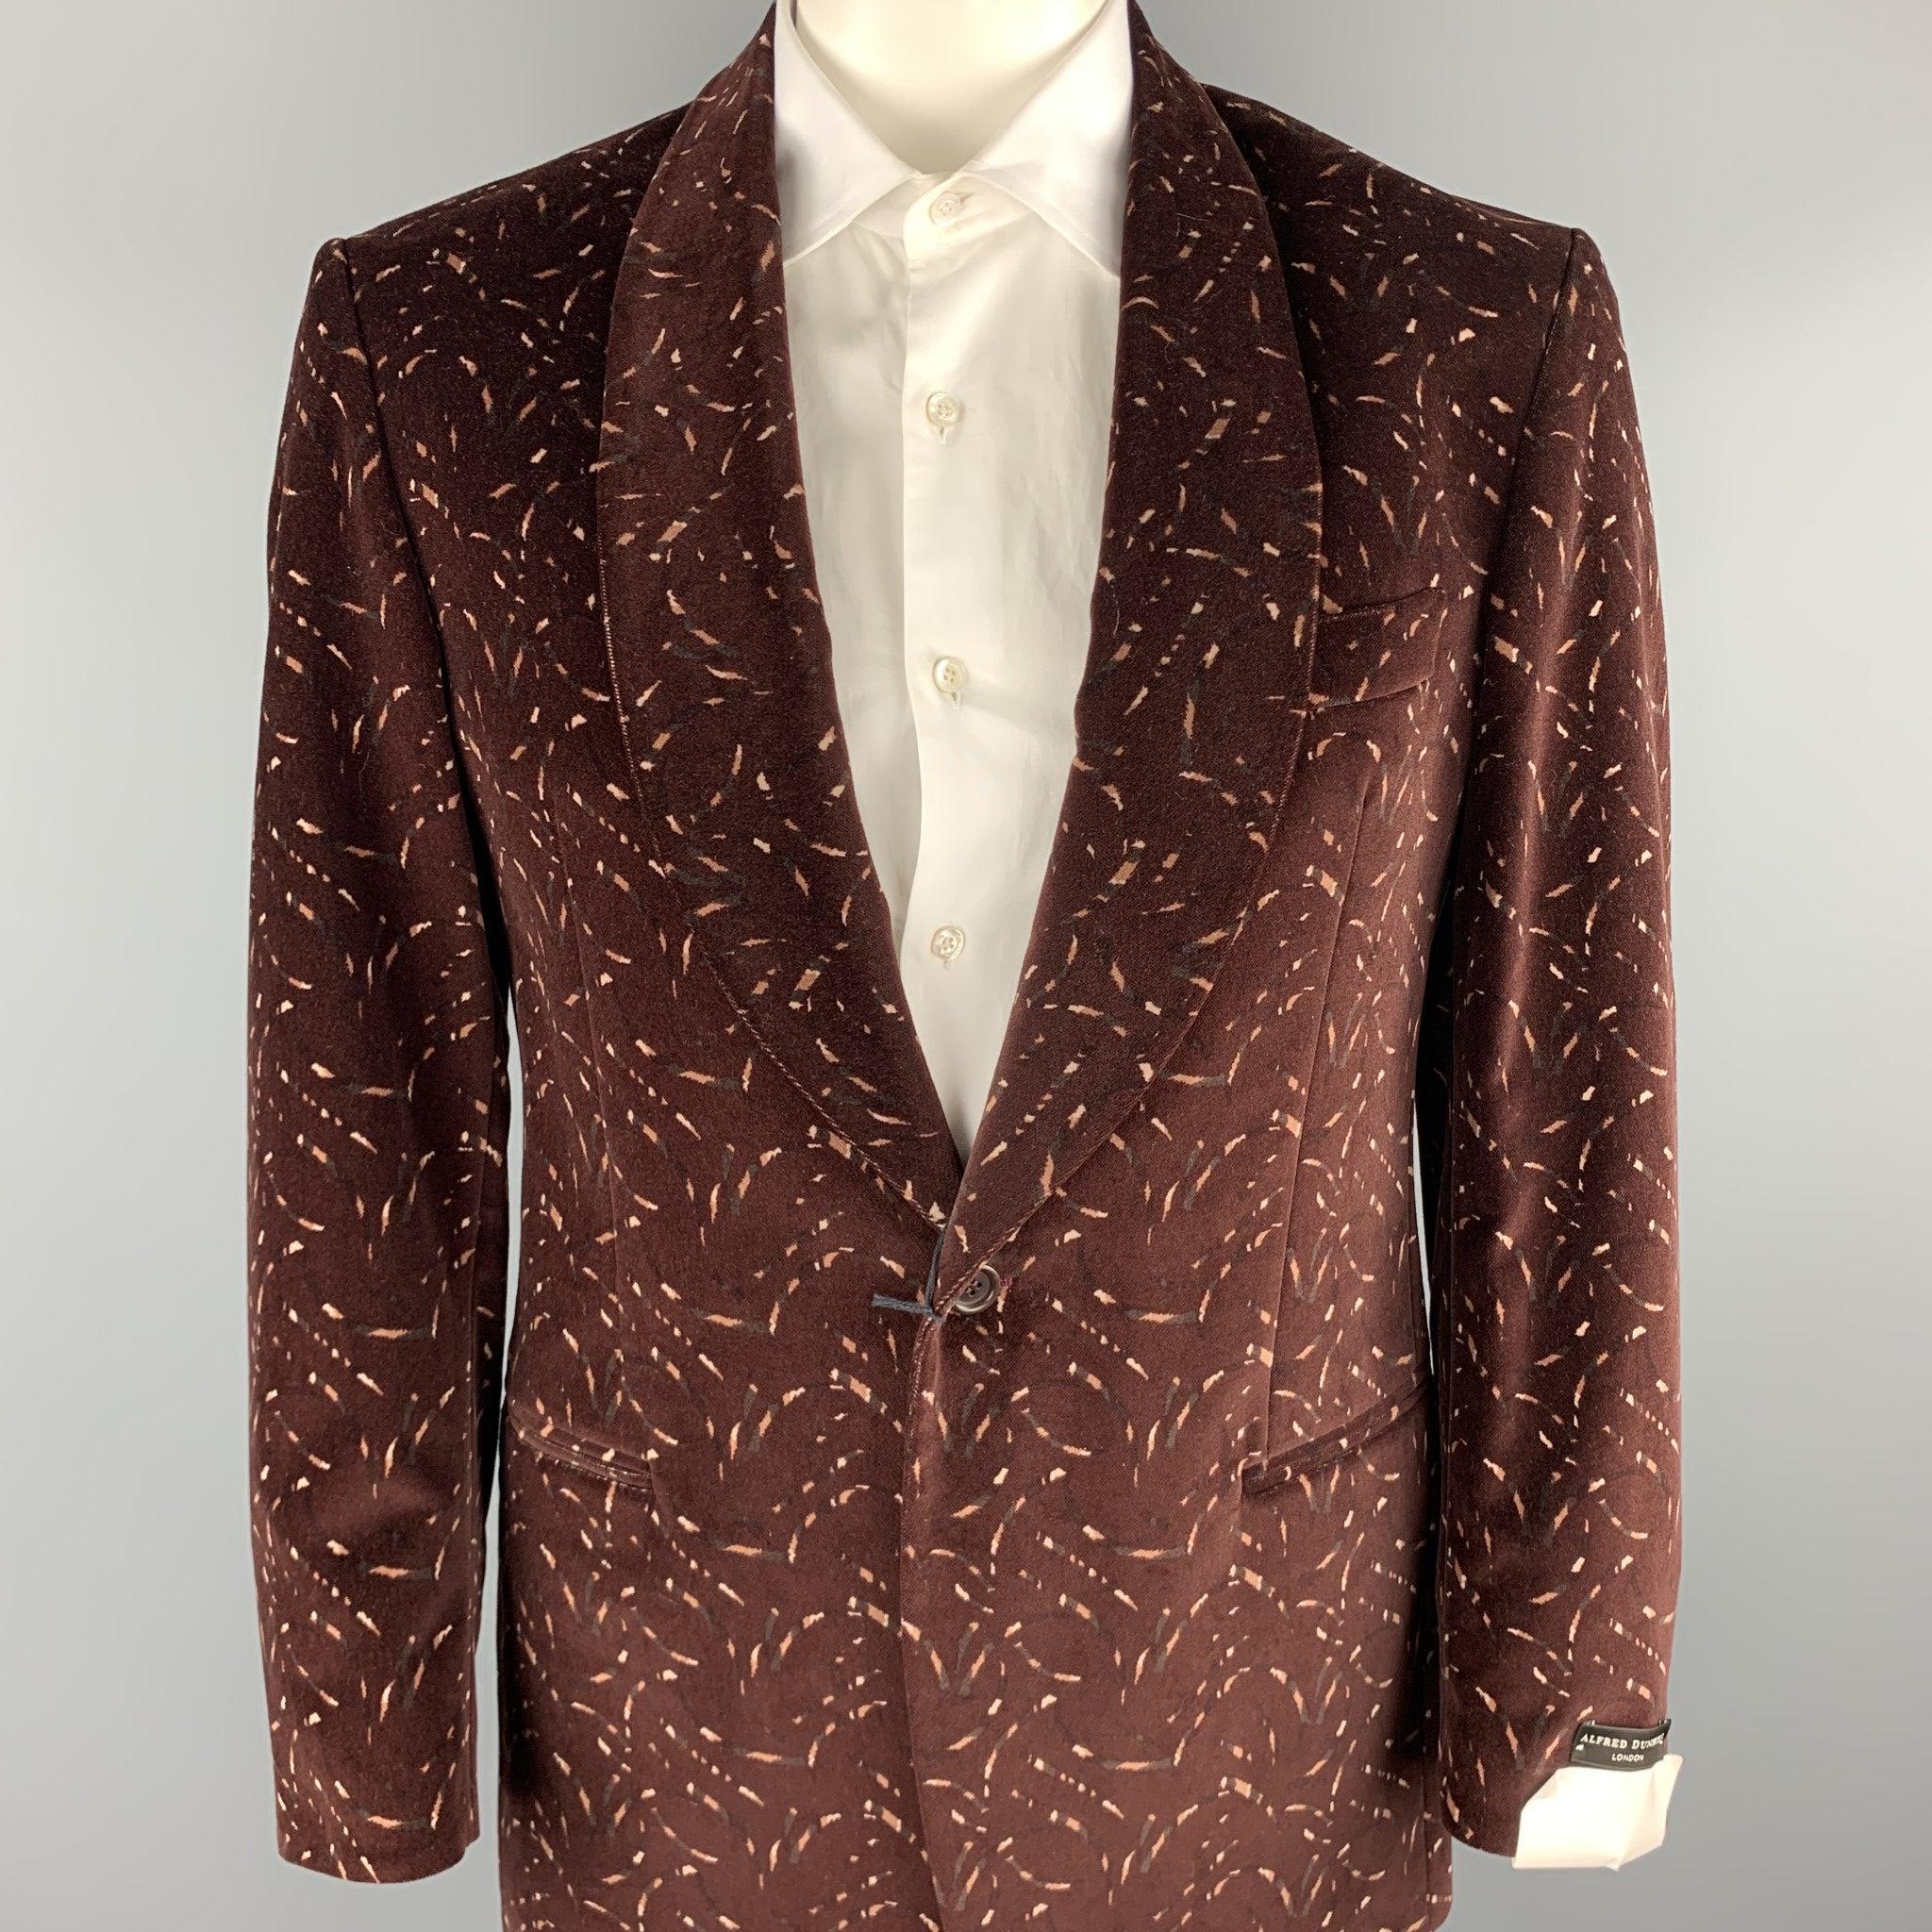 ALFRED DUNHILL sport coat comes in a burgundy print cotton velvet 
featuring a shawl collar, slit pockets, and a single button closure. Made in Italy.
New With Tags.
 

Marked:   IT 50 R
 

Measurements: 
 
Shoulder: 18.5 inches 
Chest: 40 inches